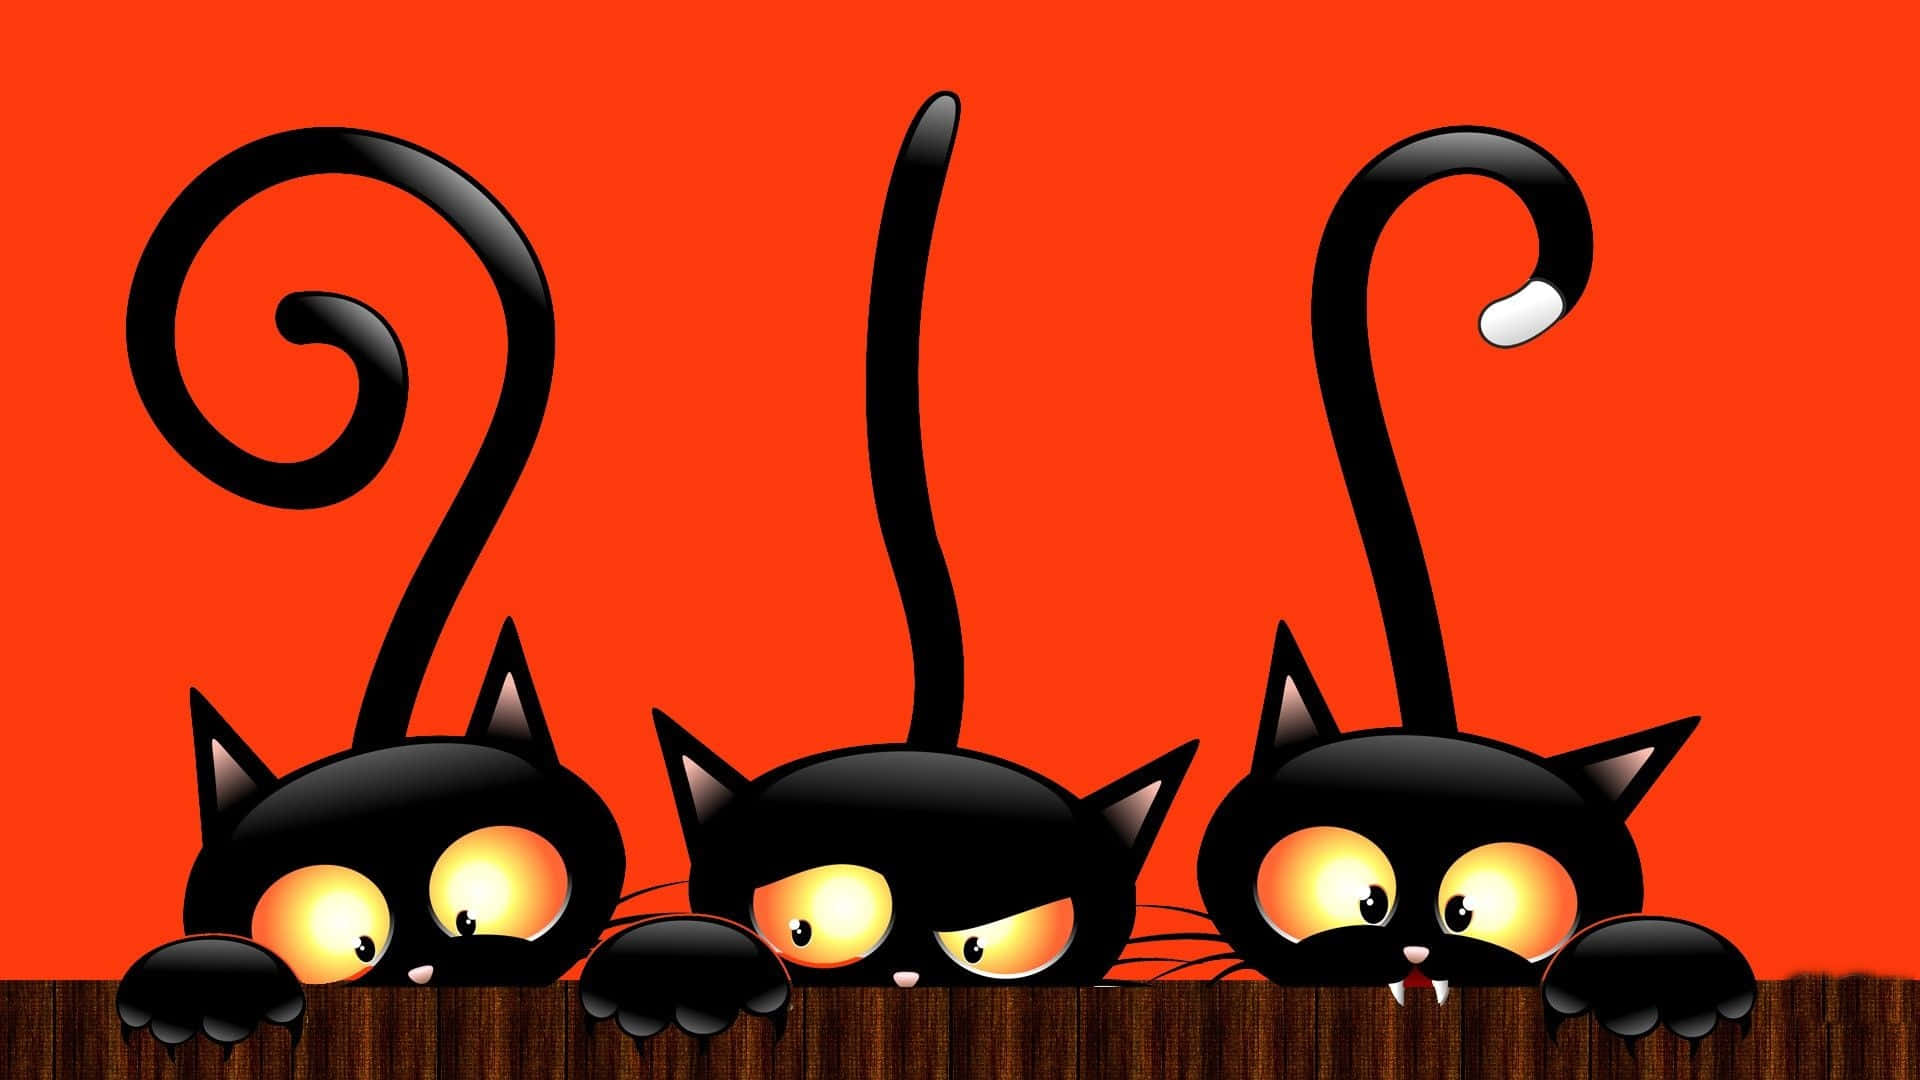 Spook Into The Halloween Season With This Mischievous Funny Halloween Wallpaper! Background